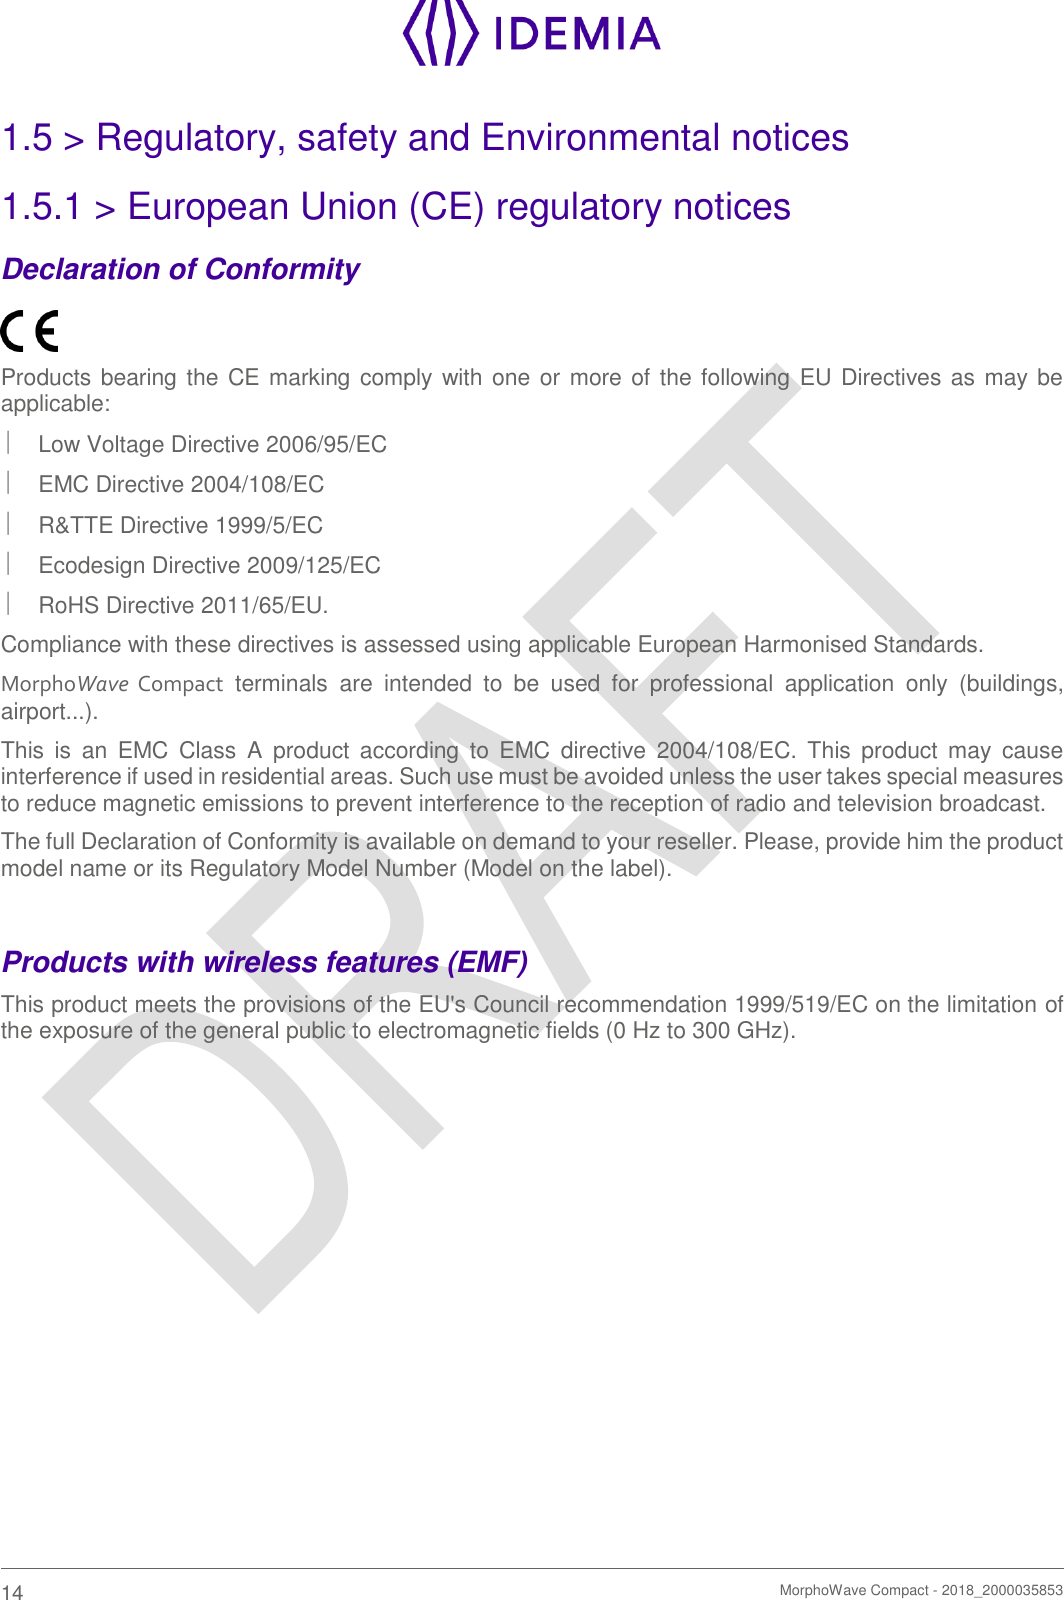    14   MorphoWave Compact - 2018_2000035853  1.5 &gt; Regulatory, safety and Environmental notices 1.5.1 &gt; European Union (CE) regulatory notices Declaration of Conformity  Products bearing the CE marking comply with one or more of the following EU Directives as may be applicable:   Low Voltage Directive 2006/95/EC   EMC Directive 2004/108/EC   R&amp;TTE Directive 1999/5/EC   Ecodesign Directive 2009/125/EC   RoHS Directive 2011/65/EU. Compliance with these directives is assessed using applicable European Harmonised Standards. MorphoWave  Compact  terminals  are  intended  to  be  used  for  professional  application  only  (buildings, airport...). This  is  an  EMC  Class  A  product  according  to  EMC  directive  2004/108/EC.  This  product  may  cause interference if used in residential areas. Such use must be avoided unless the user takes special measures to reduce magnetic emissions to prevent interference to the reception of radio and television broadcast. The full Declaration of Conformity is available on demand to your reseller. Please, provide him the product model name or its Regulatory Model Number (Model on the label).  Products with wireless features (EMF) This product meets the provisions of the EU&apos;s Council recommendation 1999/519/EC on the limitation of the exposure of the general public to electromagnetic fields (0 Hz to 300 GHz).   